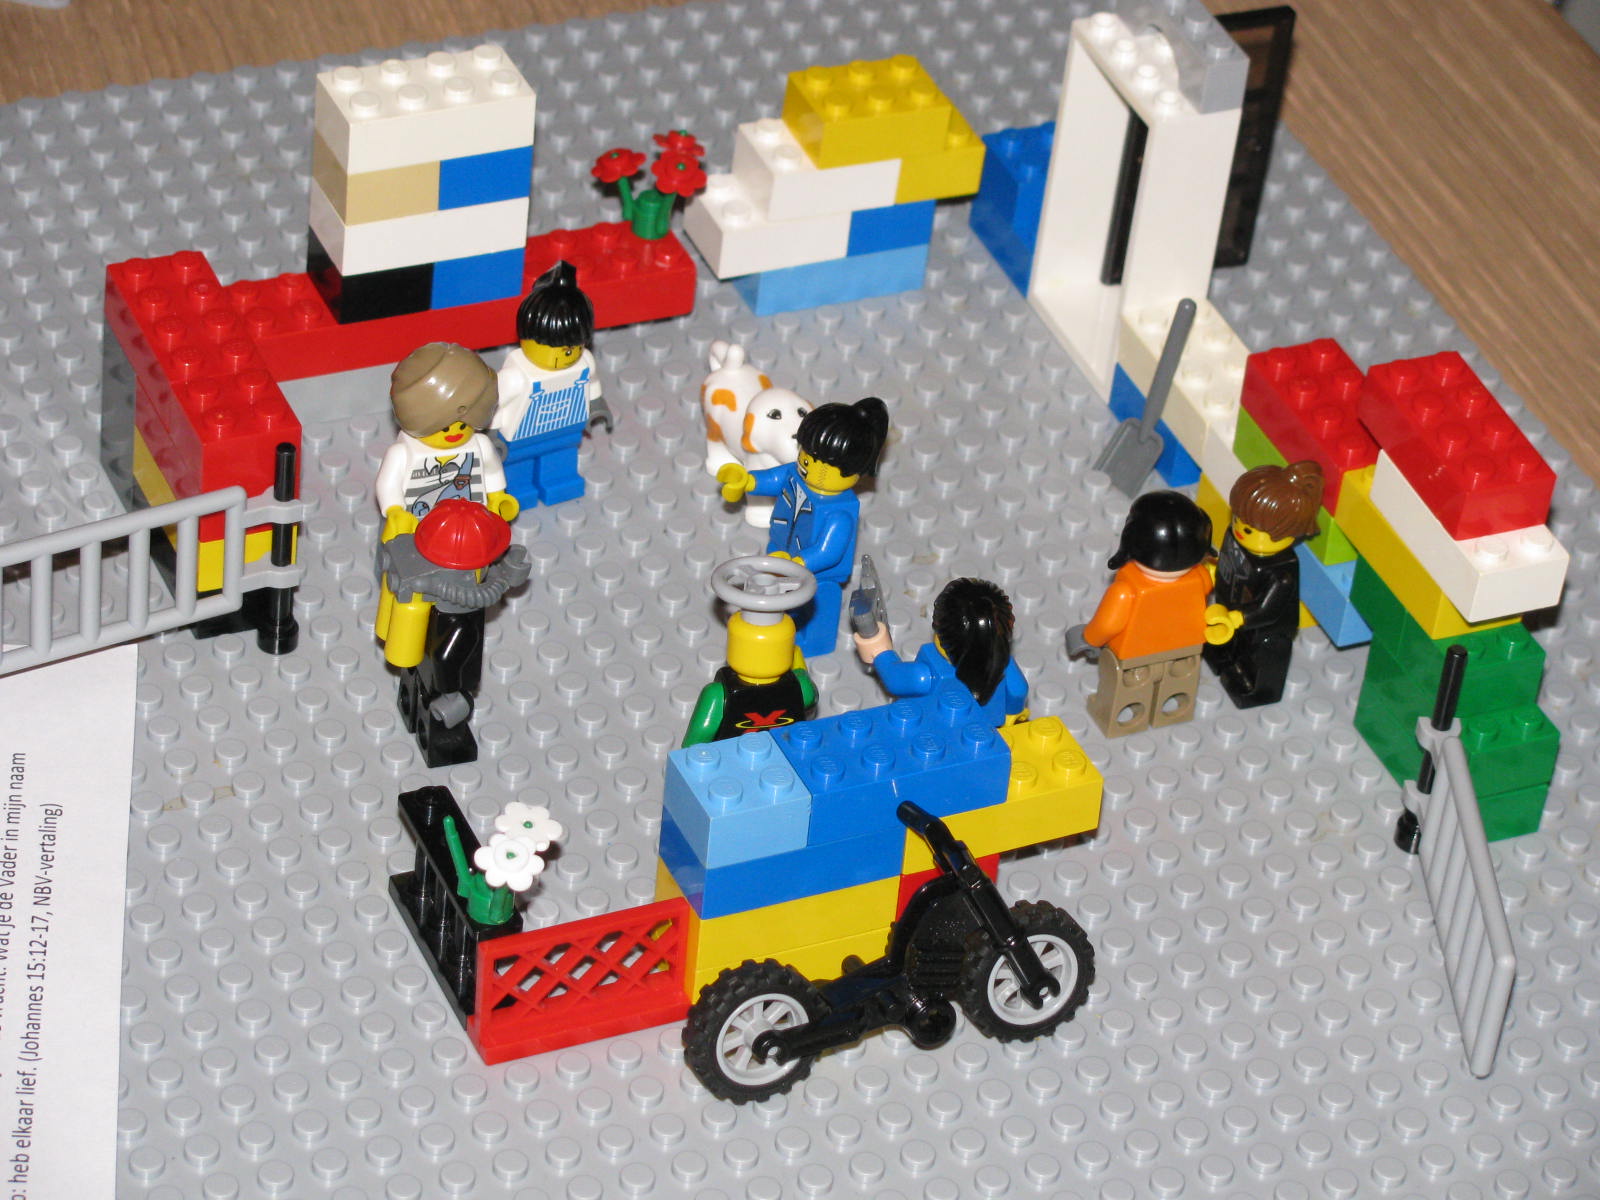 LEGO SERIOUS PLAY at Bible Study Groups. 2nd Revised Model - What is Friendship to You?